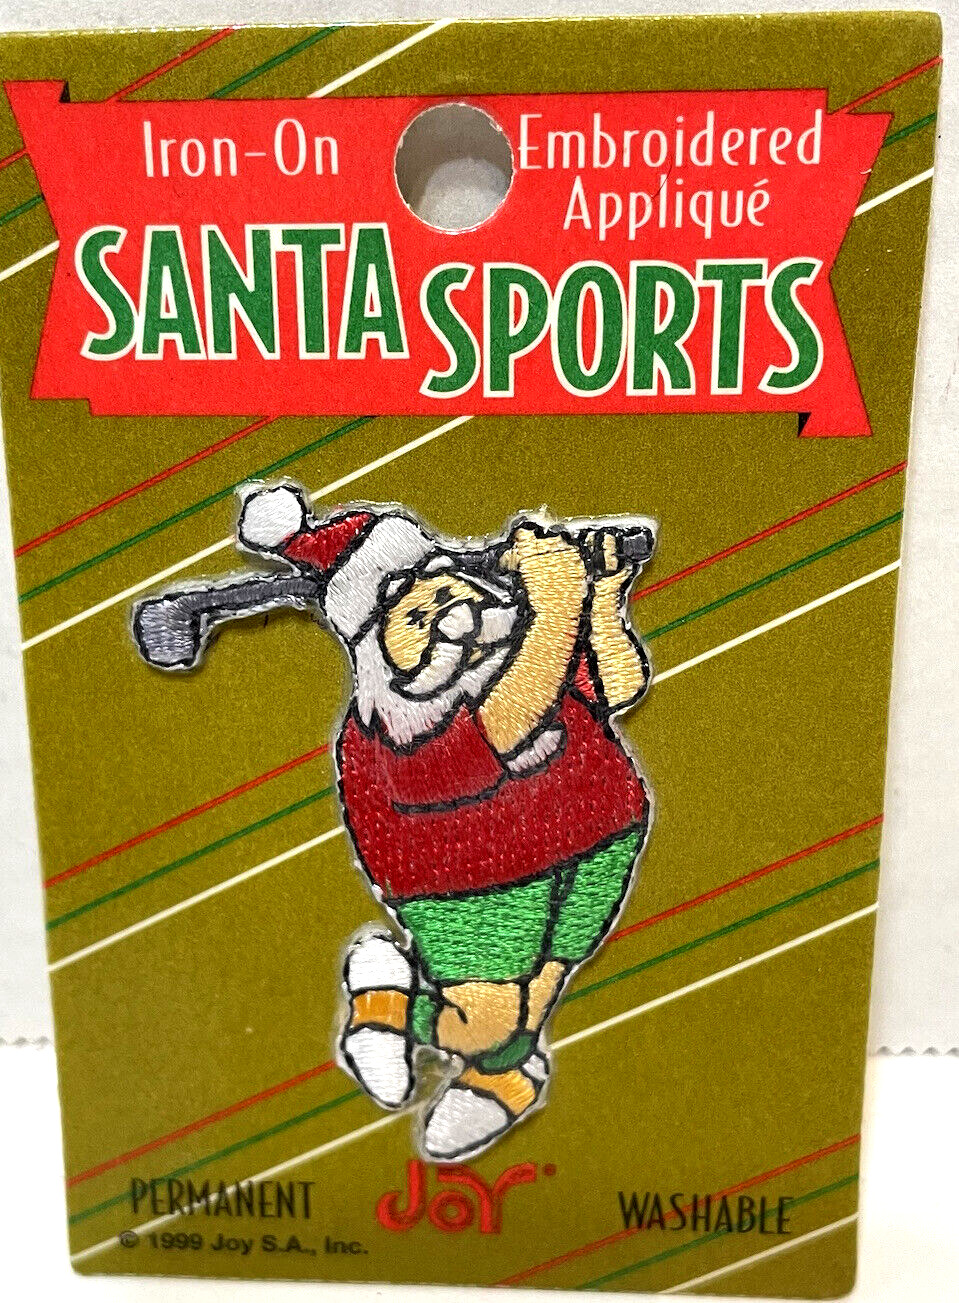 Vintage Jay Permanent 1999 Iron On Santa Sports Applique Golf New Old Stock Seal